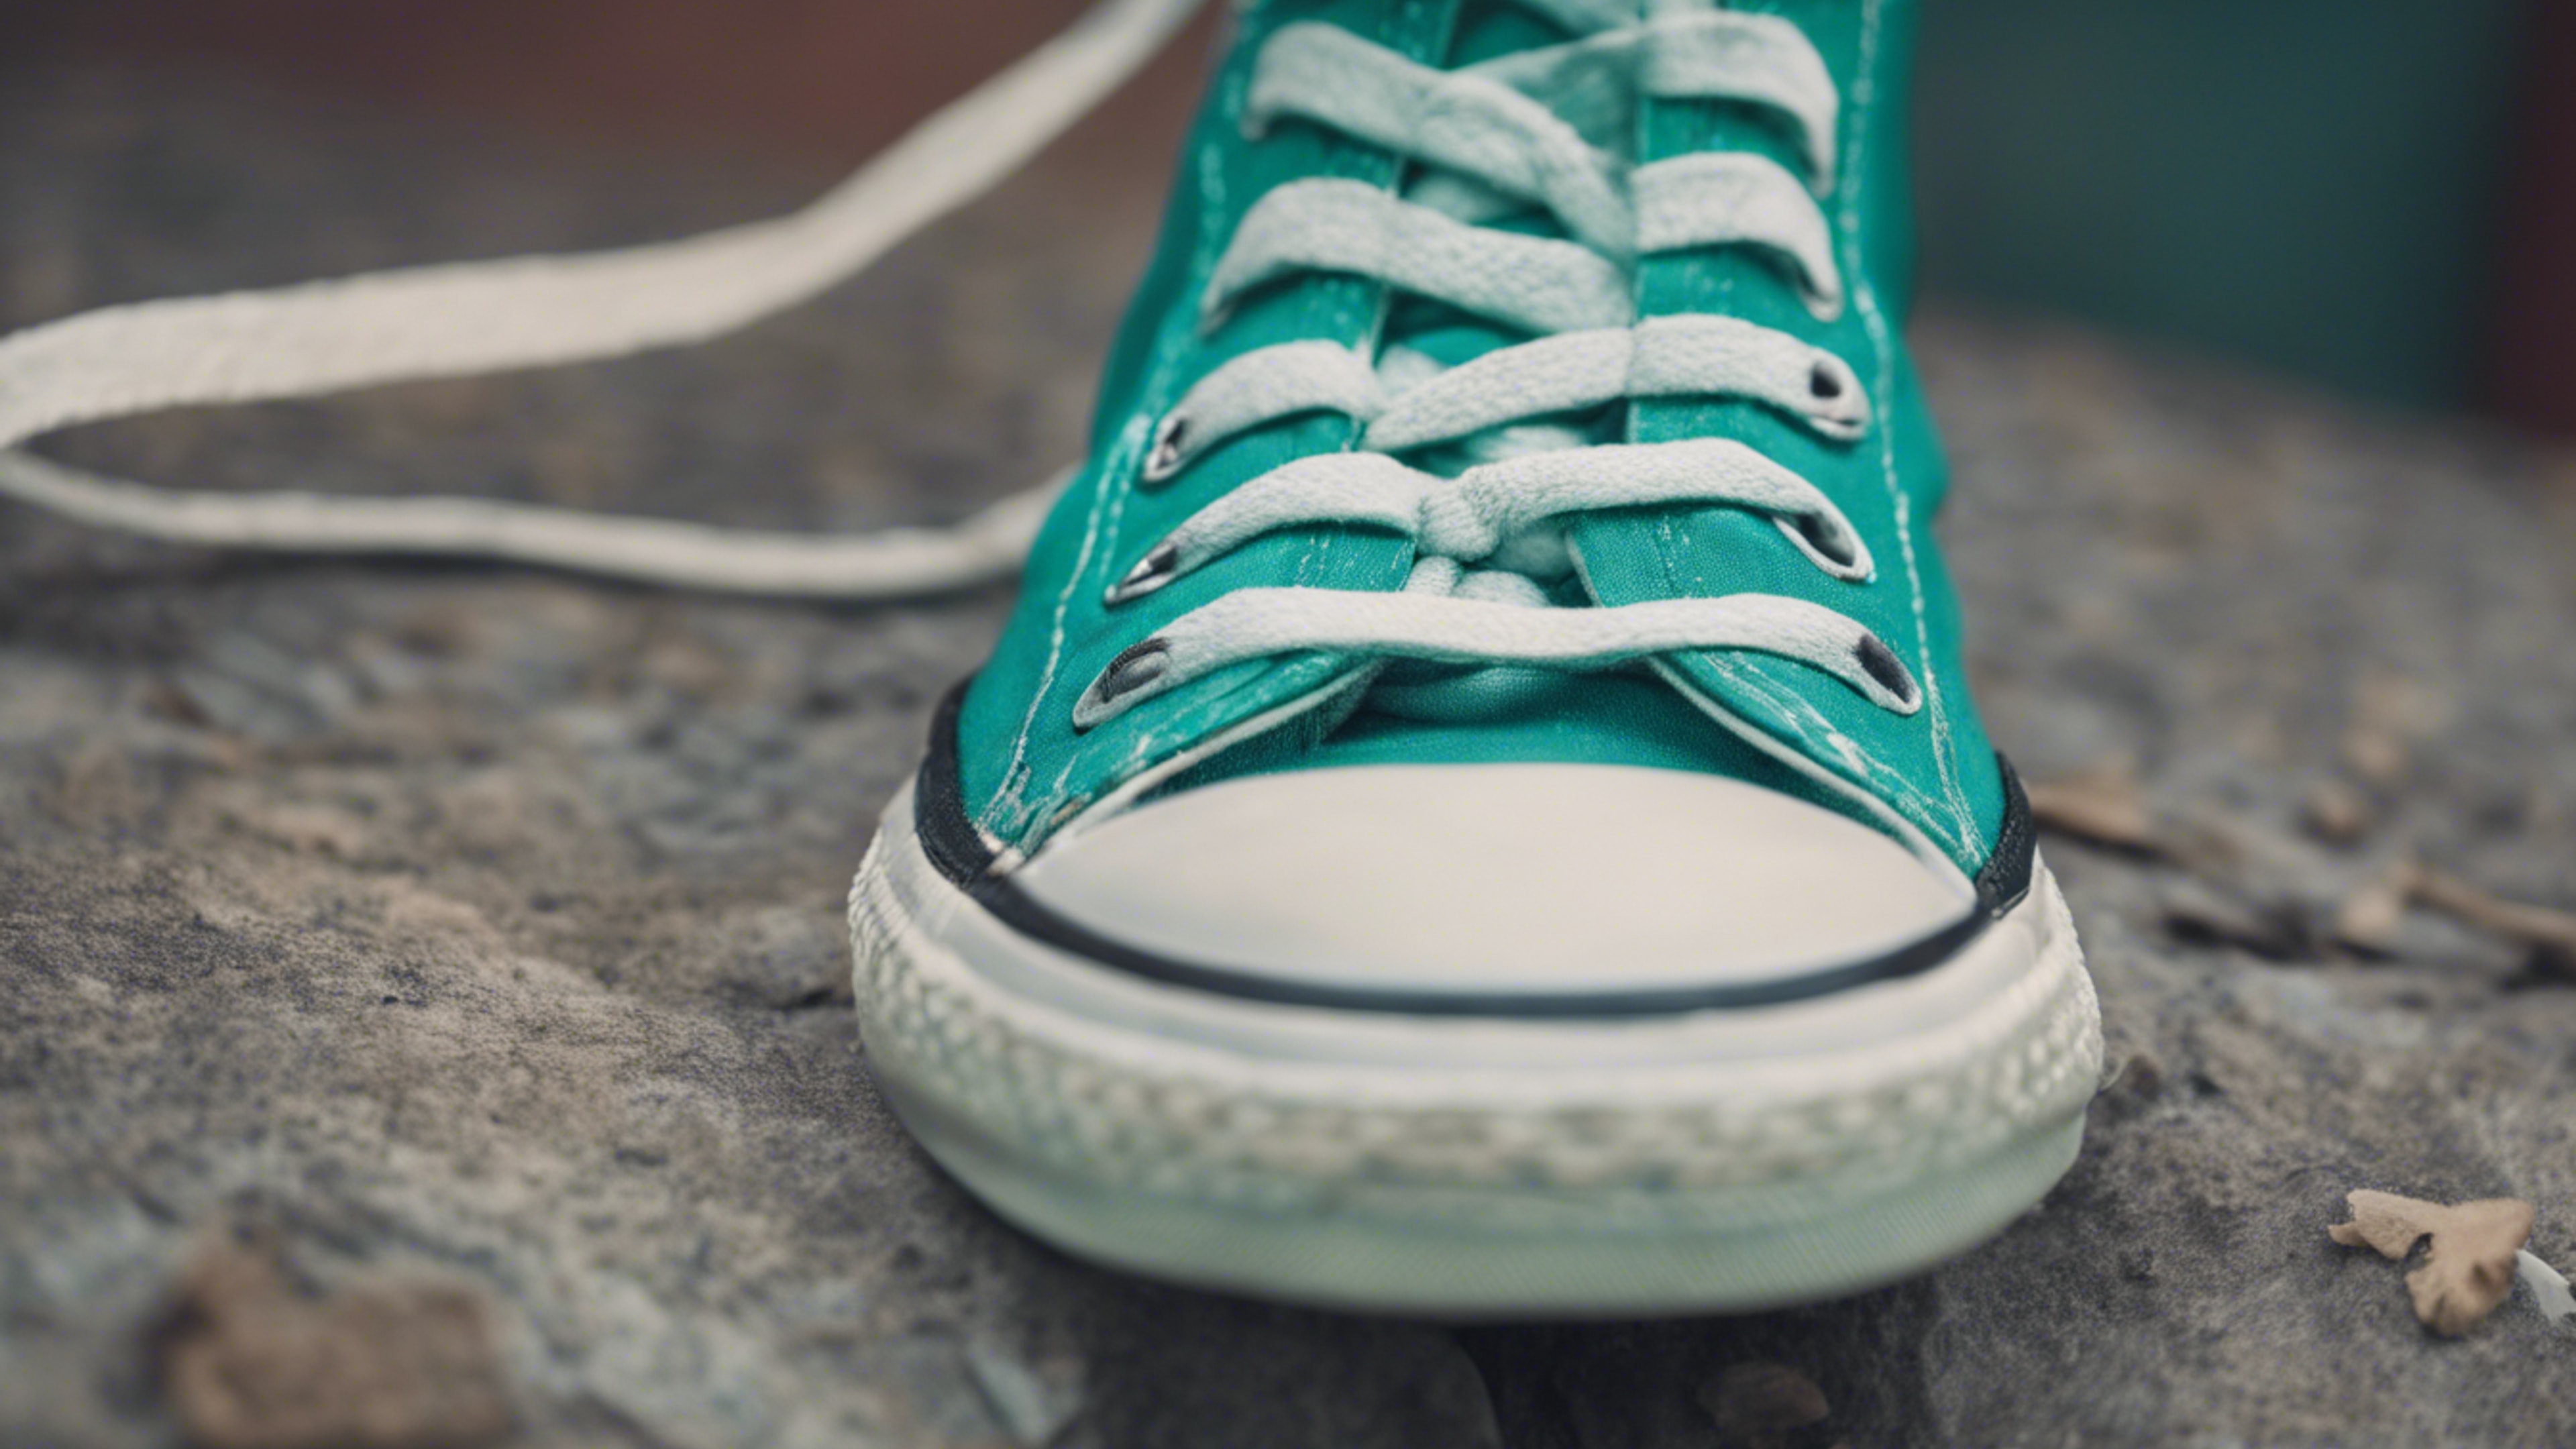 A close-up of a pair of cool teal colored Converse sneakers. Wallpaper[fe0f07076e3947159bbd]